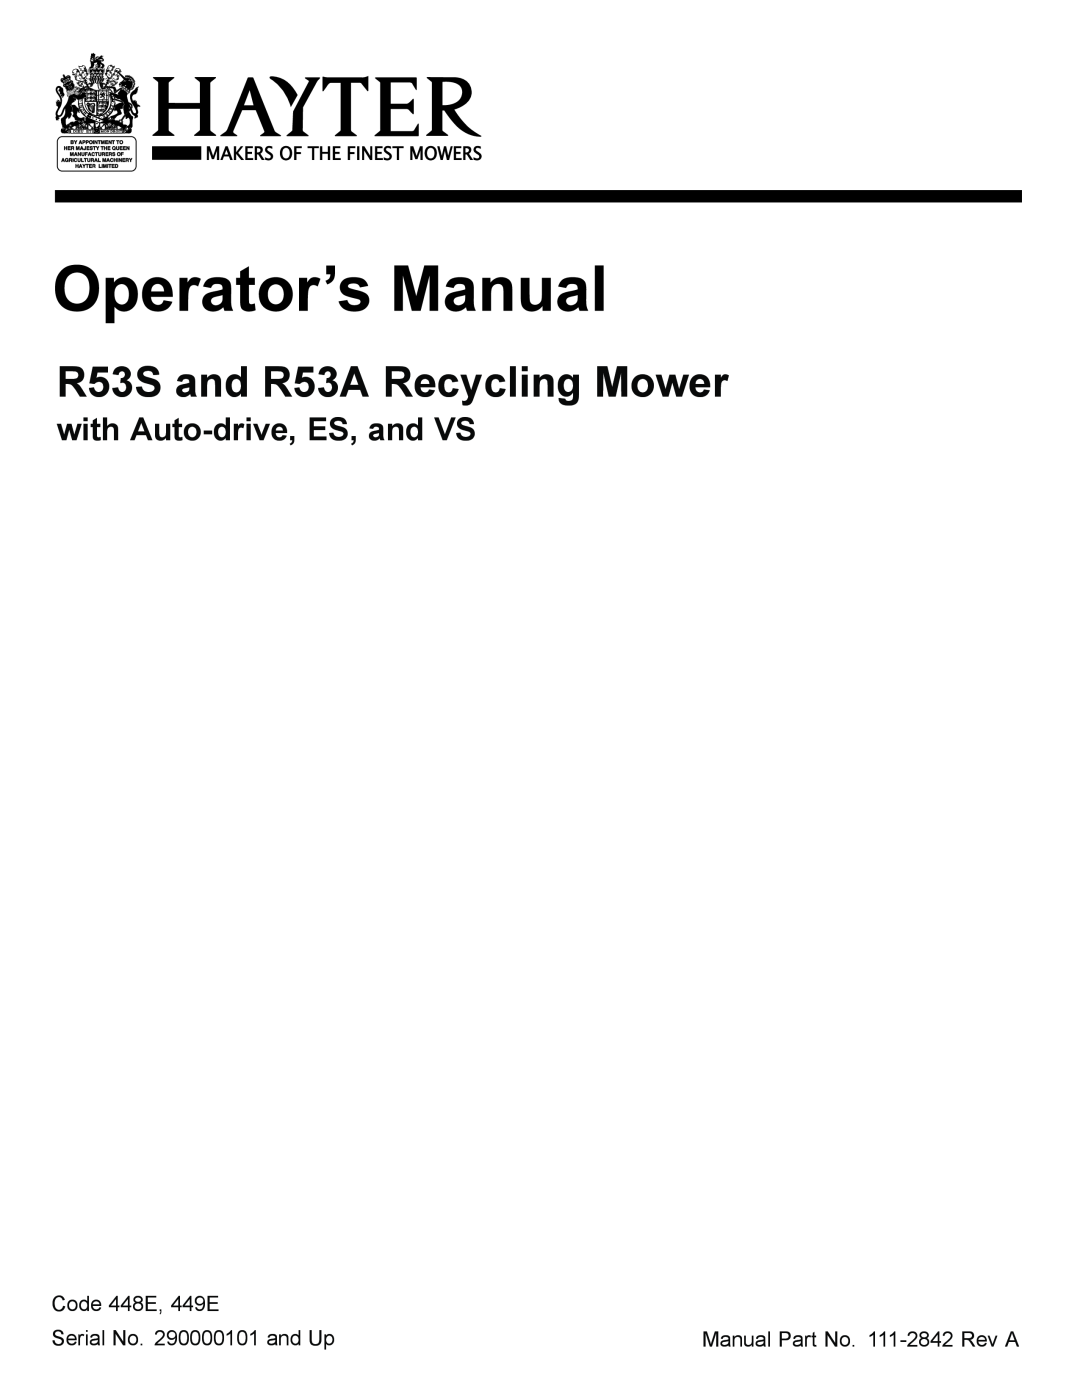 Hayter Mowers manual R53S and R53A Recycling Mower, with Auto-drive,ES, and VS, Code 448E, 449E 